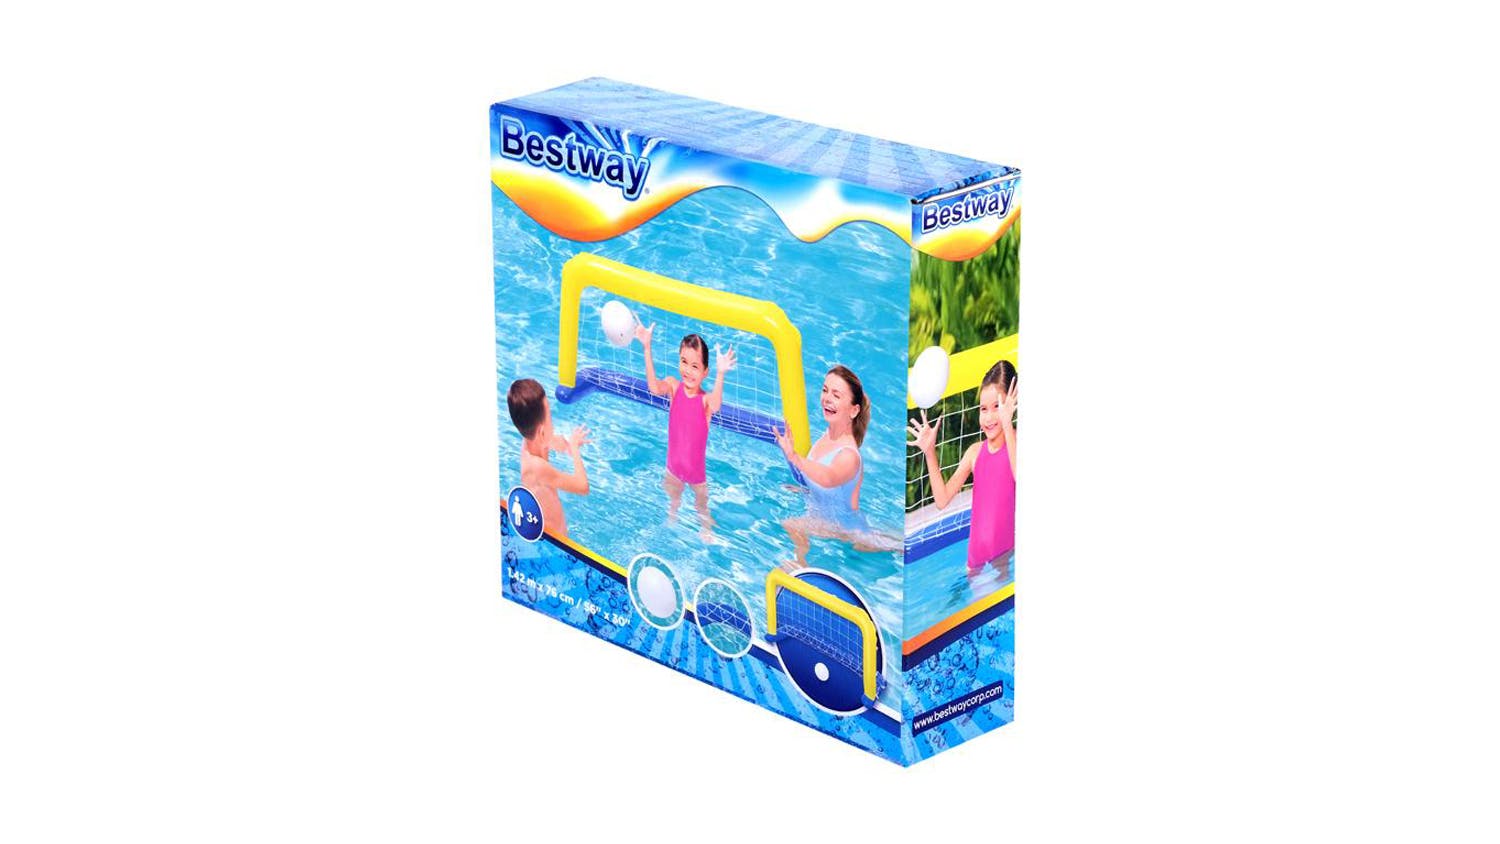 Inflatable Bestway Polo Water Game Set - 1.42m x 76cm Yellow/Blue ...